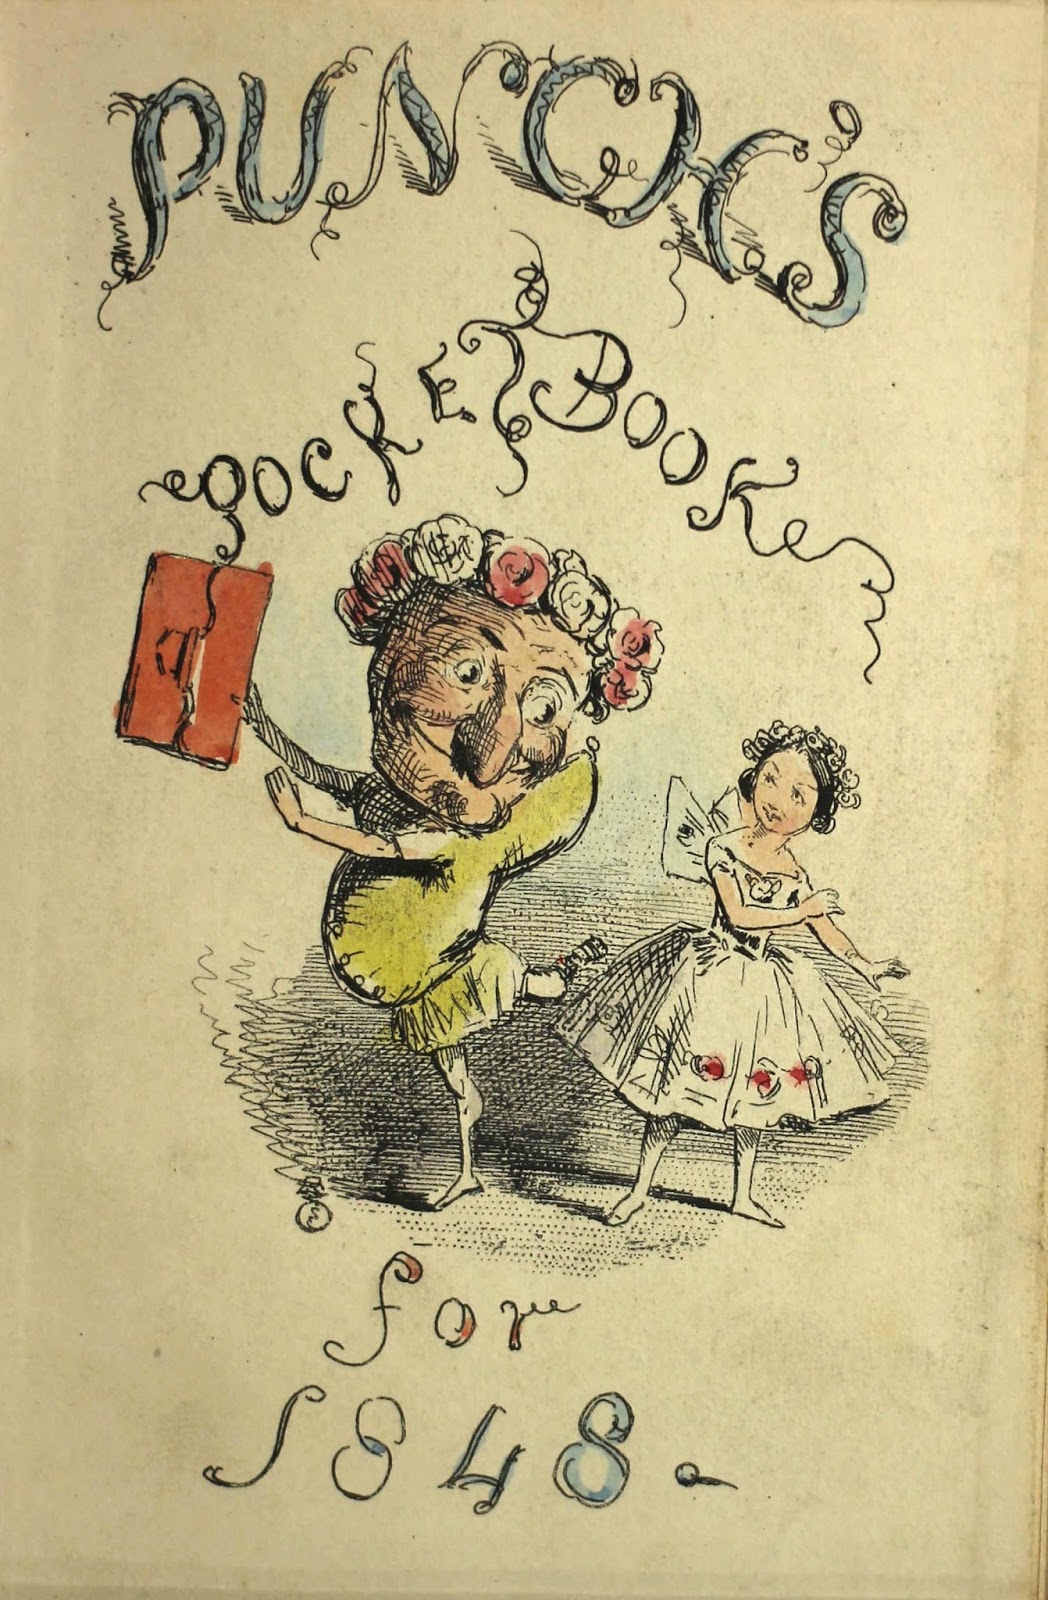 Front cover of a 1848 edition of Punch’s Pocket Book, with color illustration of a small girl in a white dress who is dancing with a larger figure holding the red pocketbook